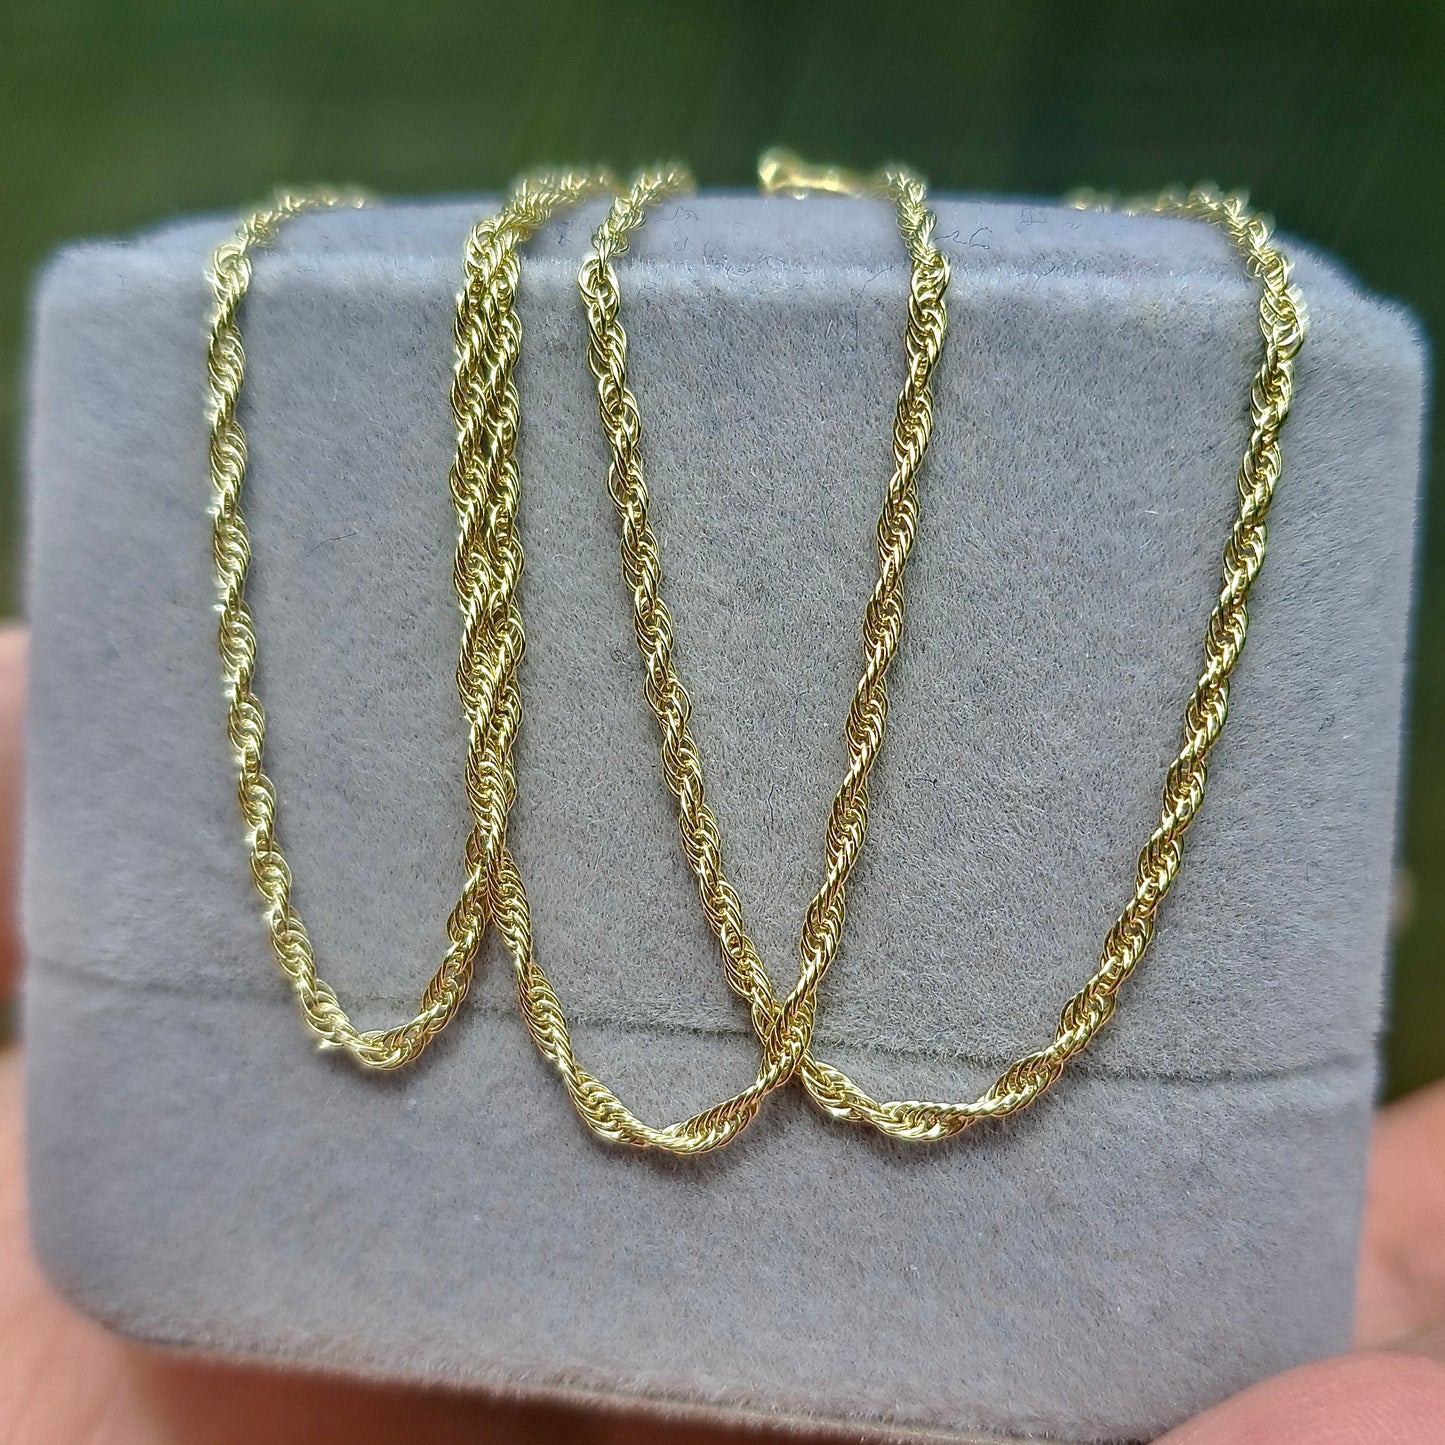 Solid 9ct Yellow Gold Rope Chain Necklace, 1.2mm